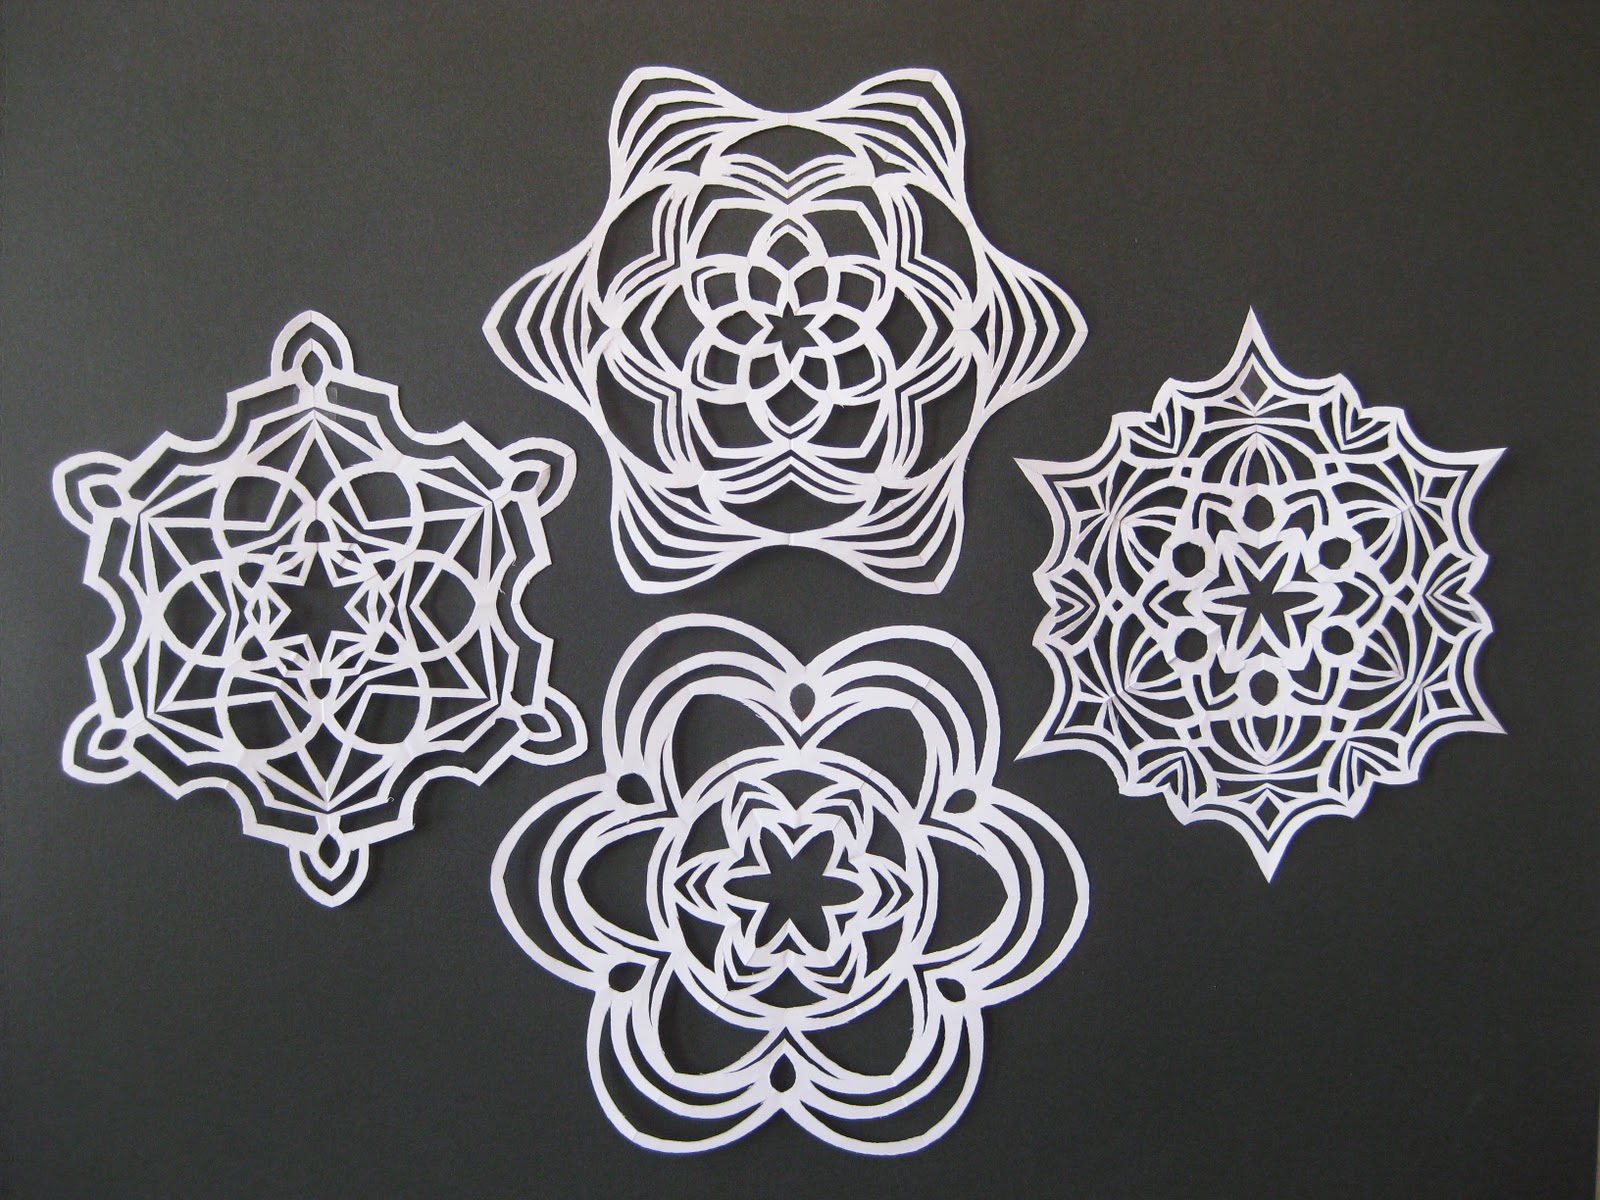 Free patterns and images of paper snowflakes by D.C. Stredulinsky